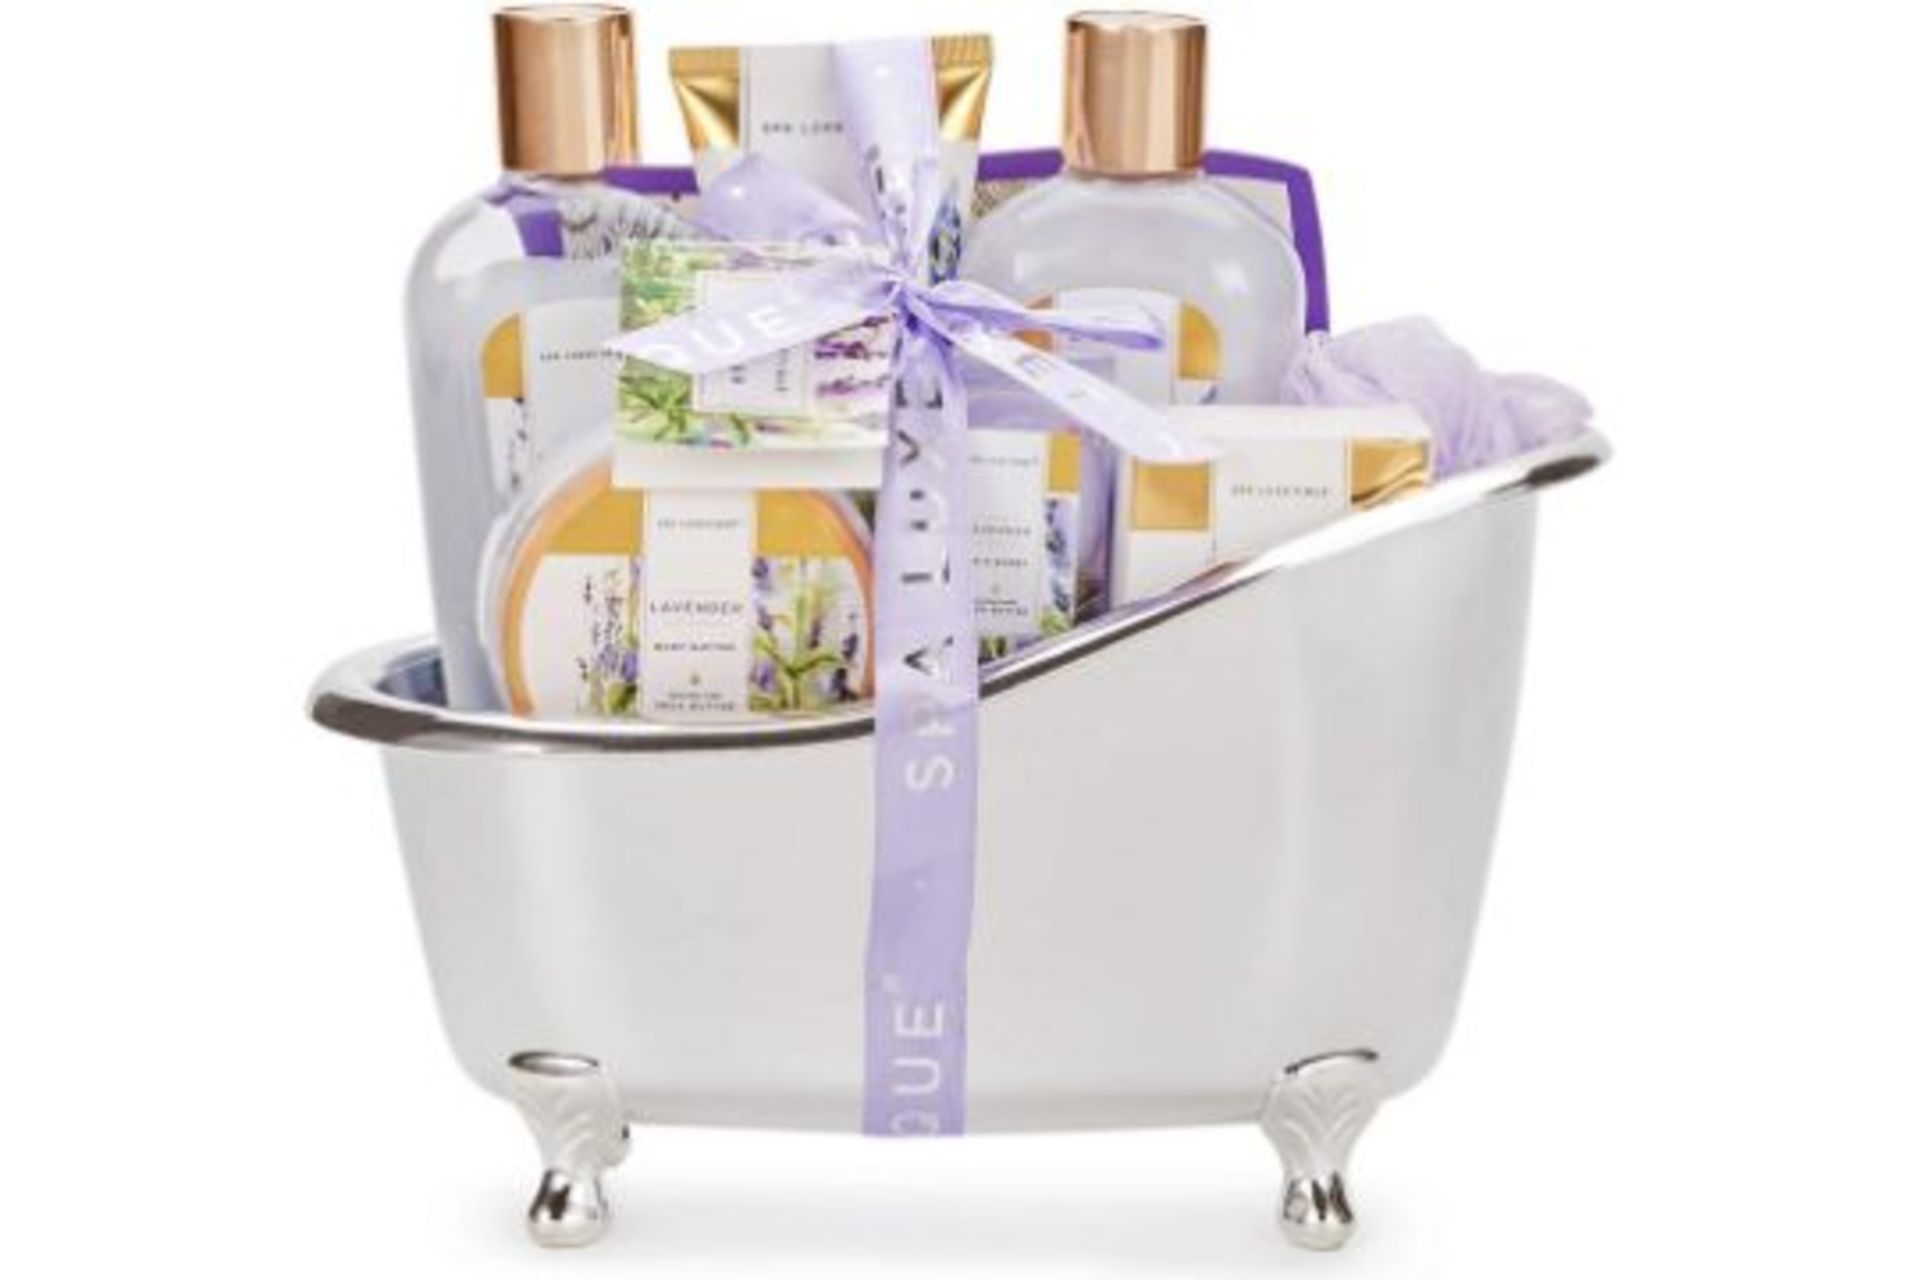 PALLET TO CONTAIN 48 x NEW BOXED Spa Luxetique Lavender Spa Bathtub Set. (BEC-5-NEW) Natural Bath